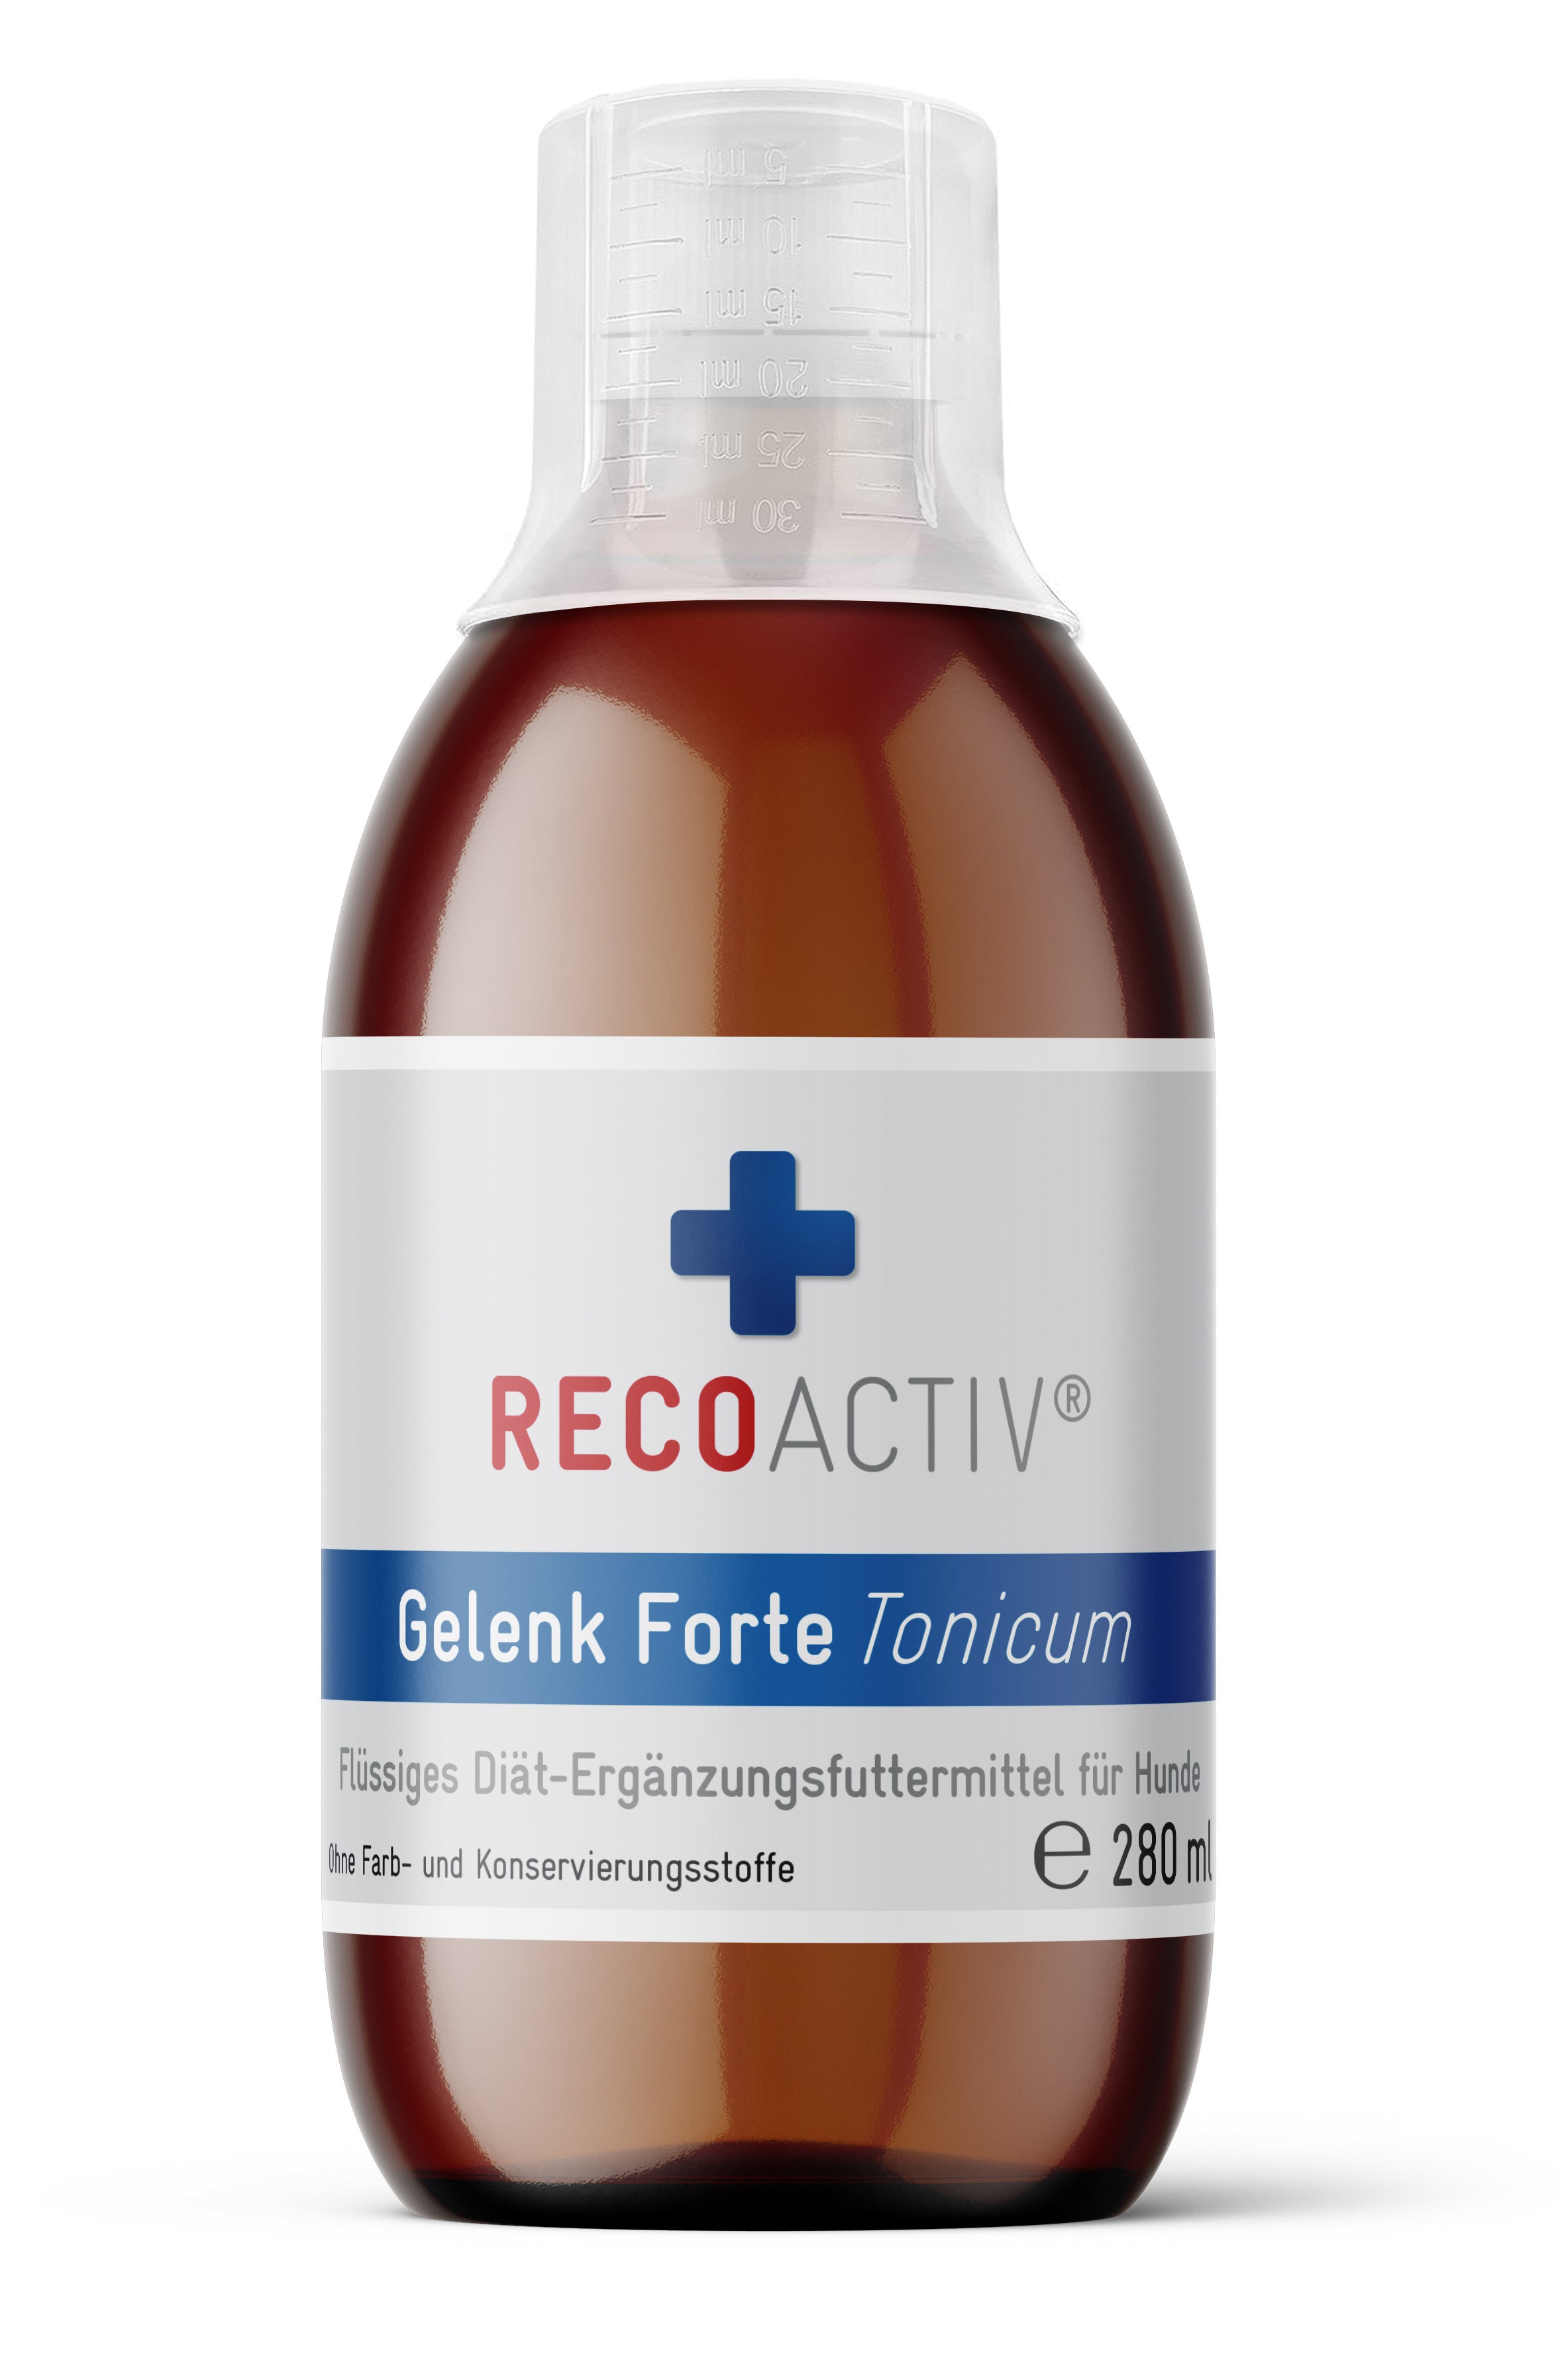 RECOACTIV® Joint Tonicum Forte for dogs with degenerative joint diseases